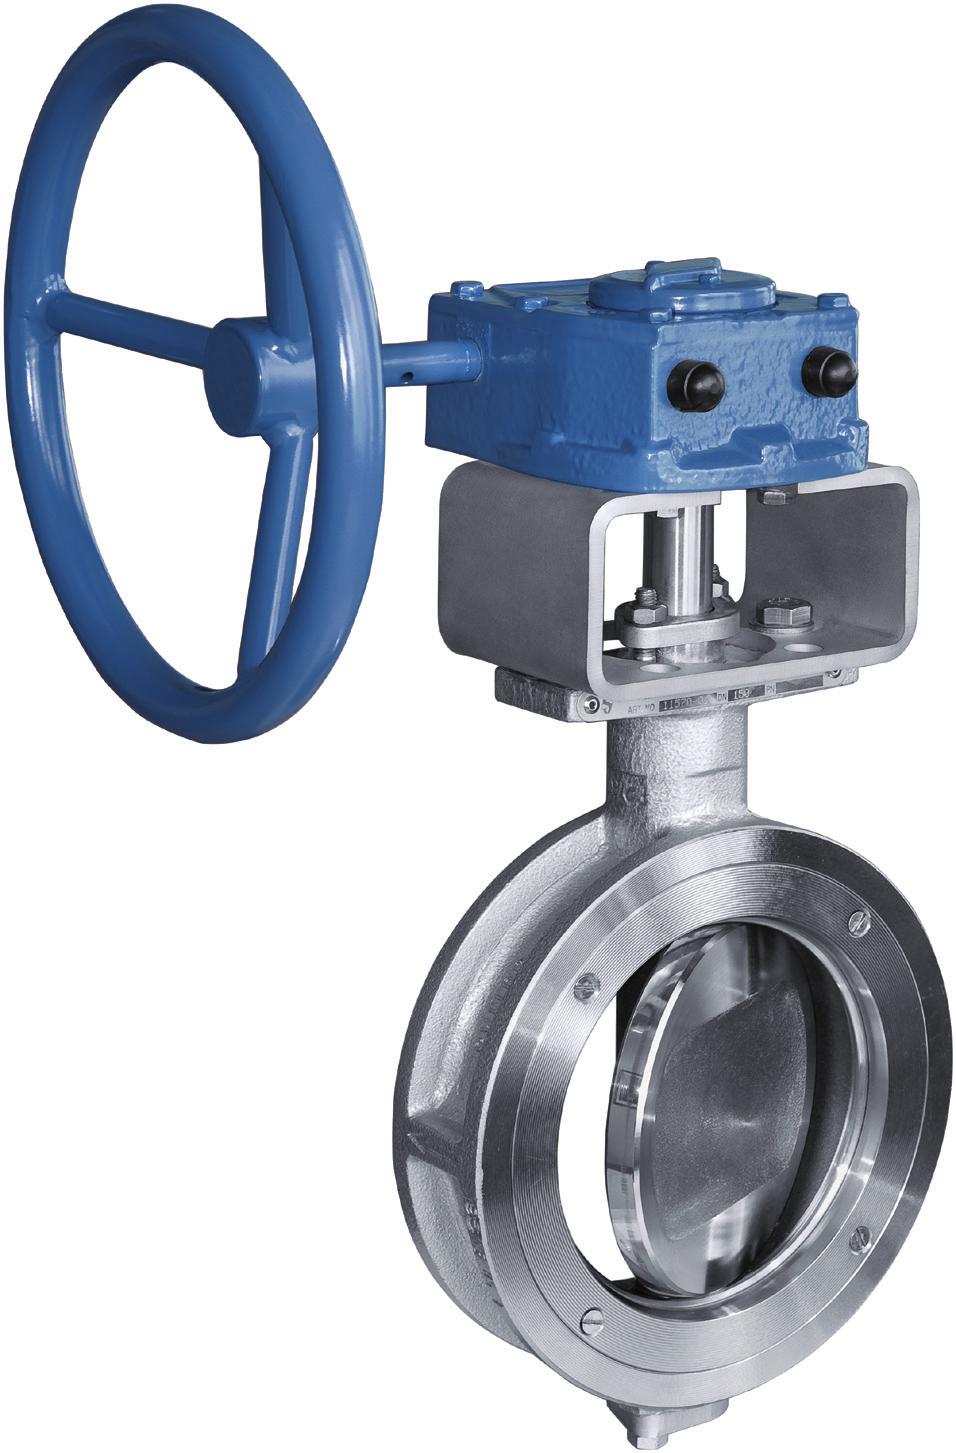 Datasheet Butterfly valve for marine cargo systems Edition: 2013-05 Type MTV Type MTVL Wafer design Lugged design Nominal pressure PN 10-25 Class 150 Nominal size DN 80-400 Material Stainless steel